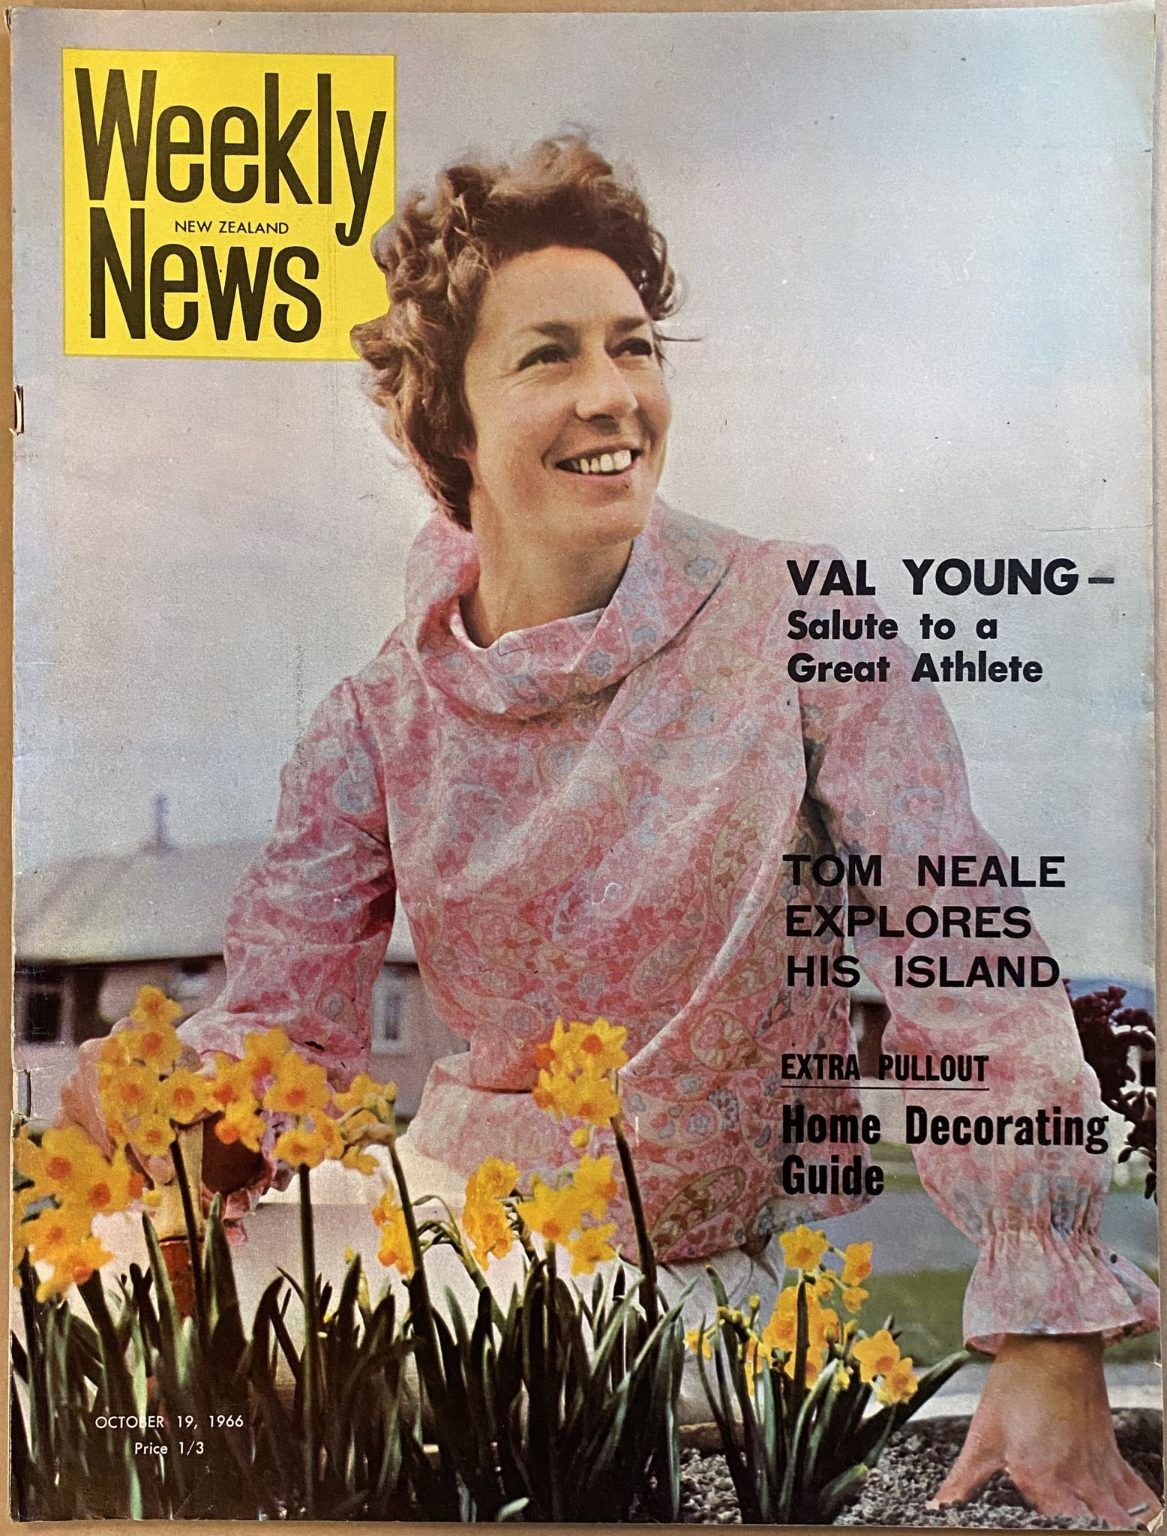 OLD NEWSPAPER: New Zealand Weekly News, No. 5369, 19 October 1966